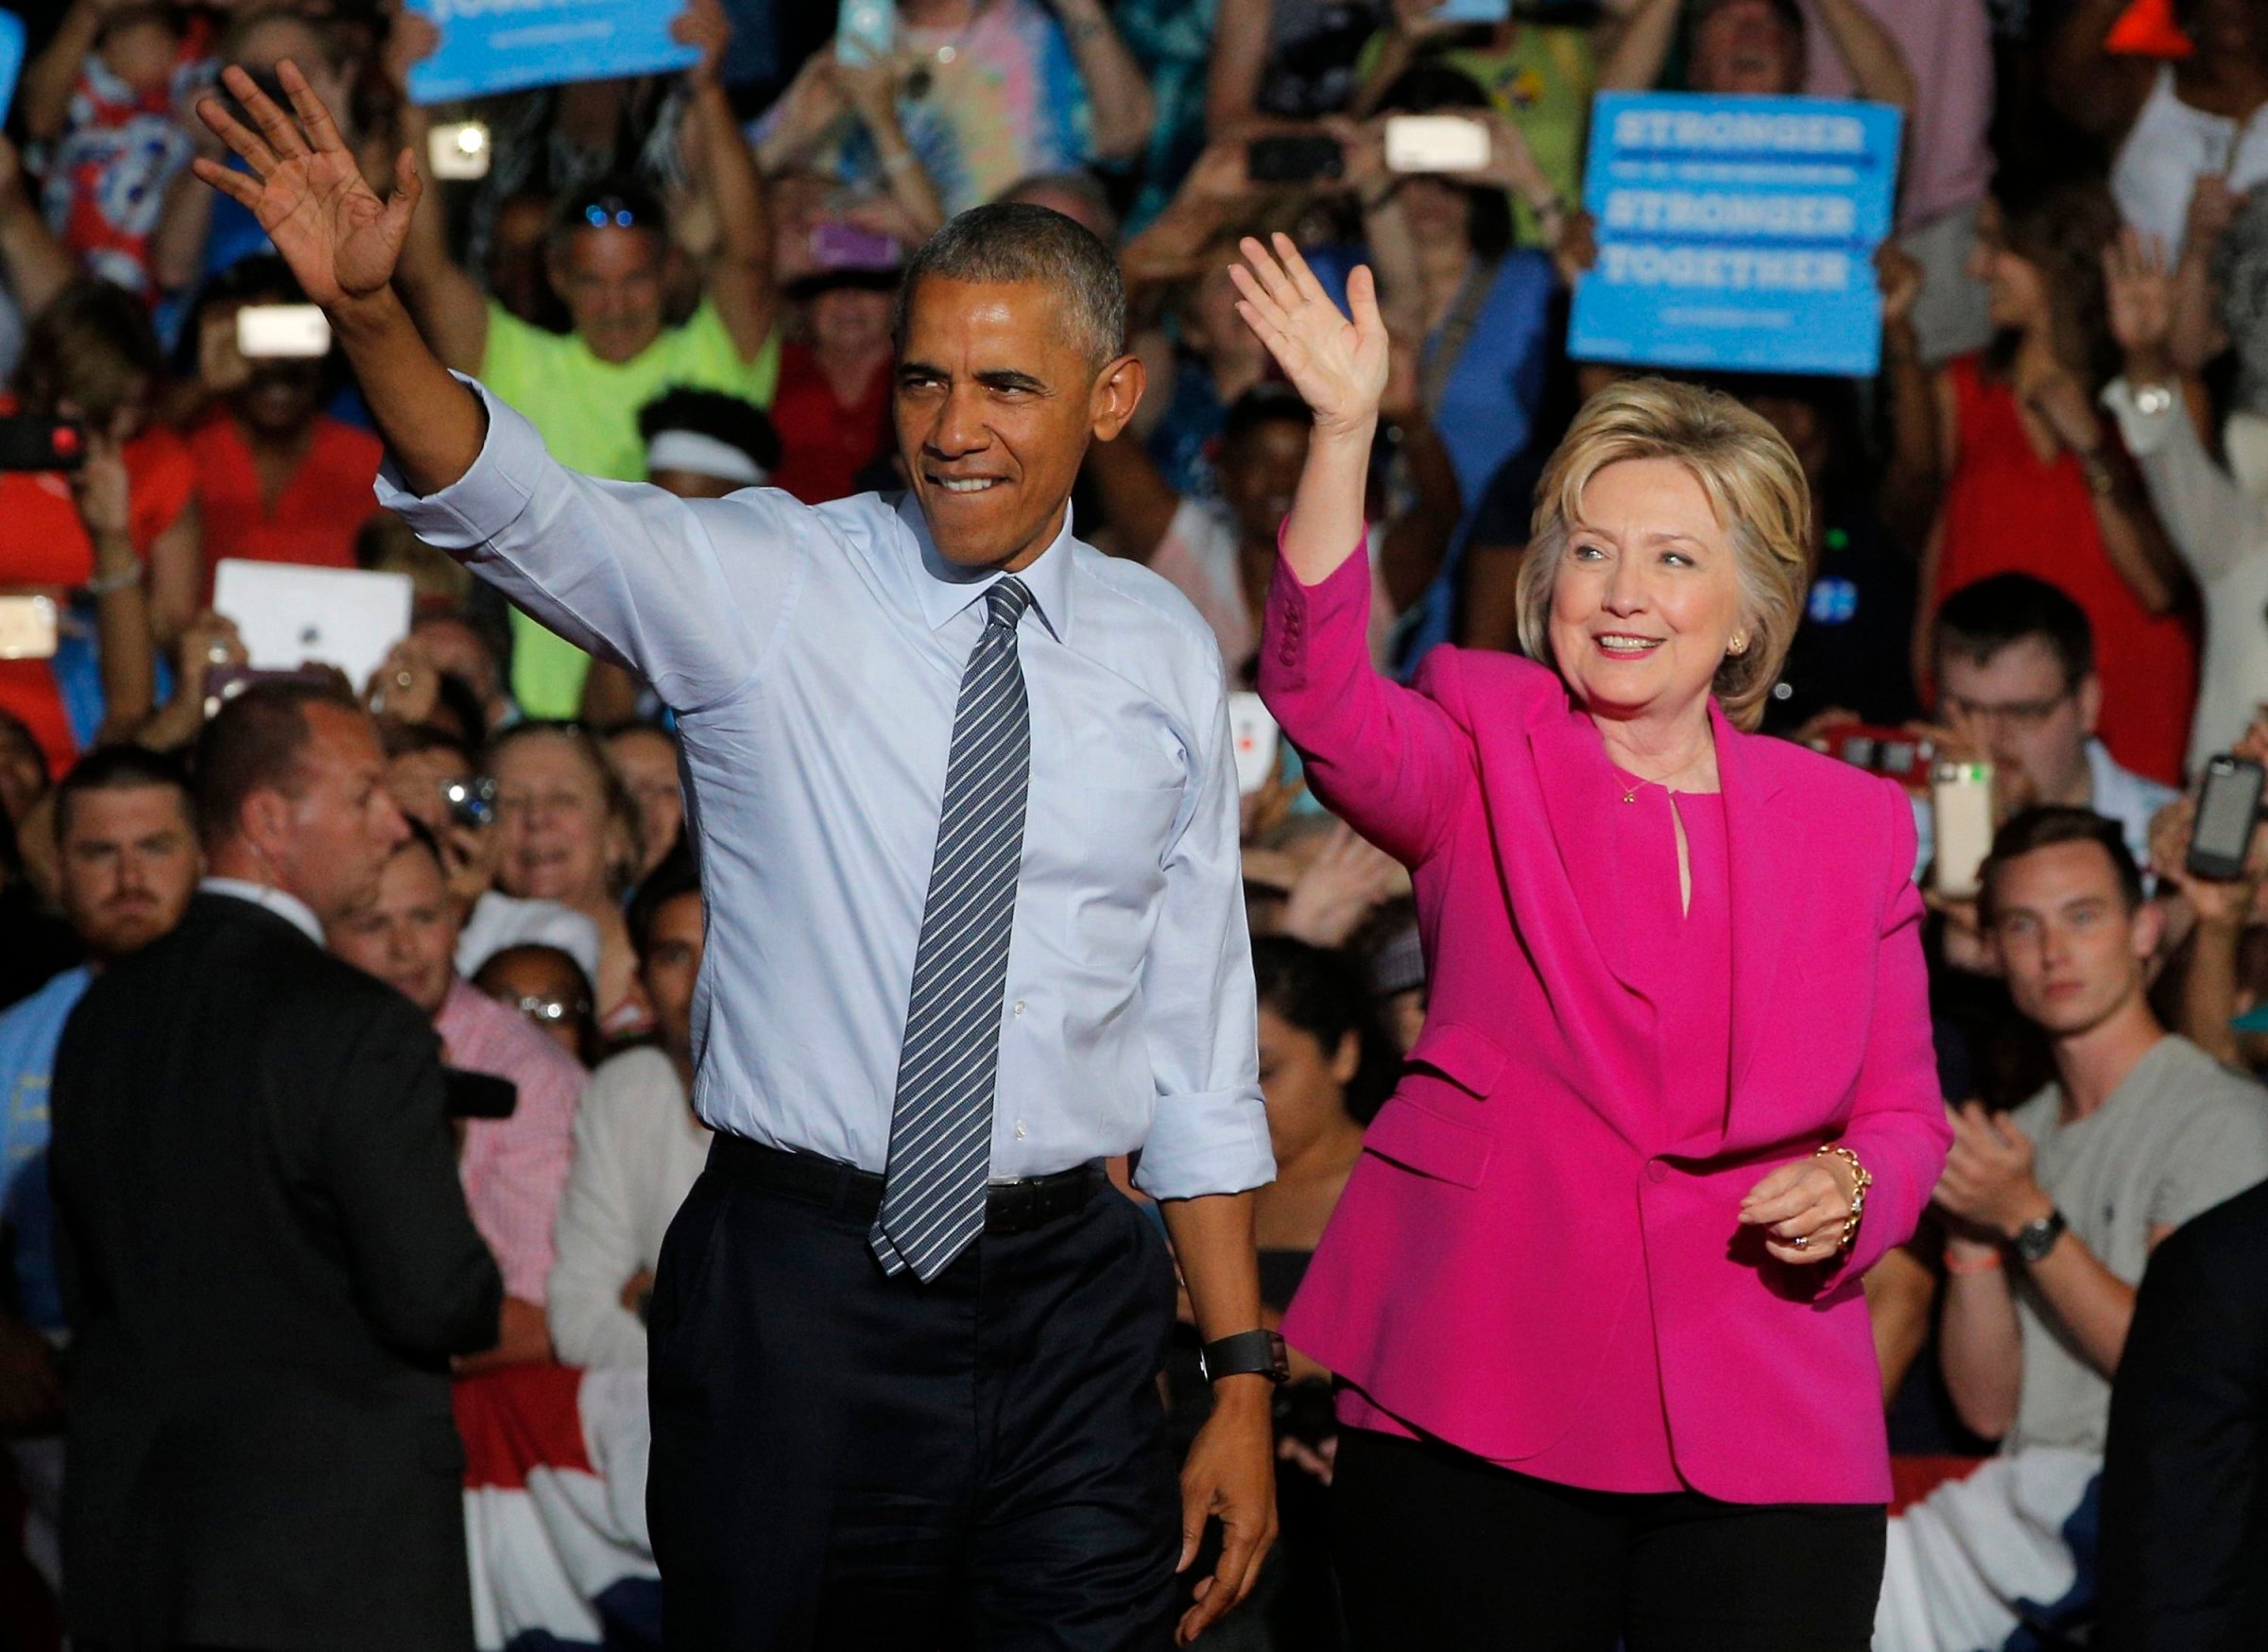 President Barack Obama waves with Democratic U.S. presidential candidate Hillary Clinton during a Clinton campaign event in Charlotte, July 5, 2016.